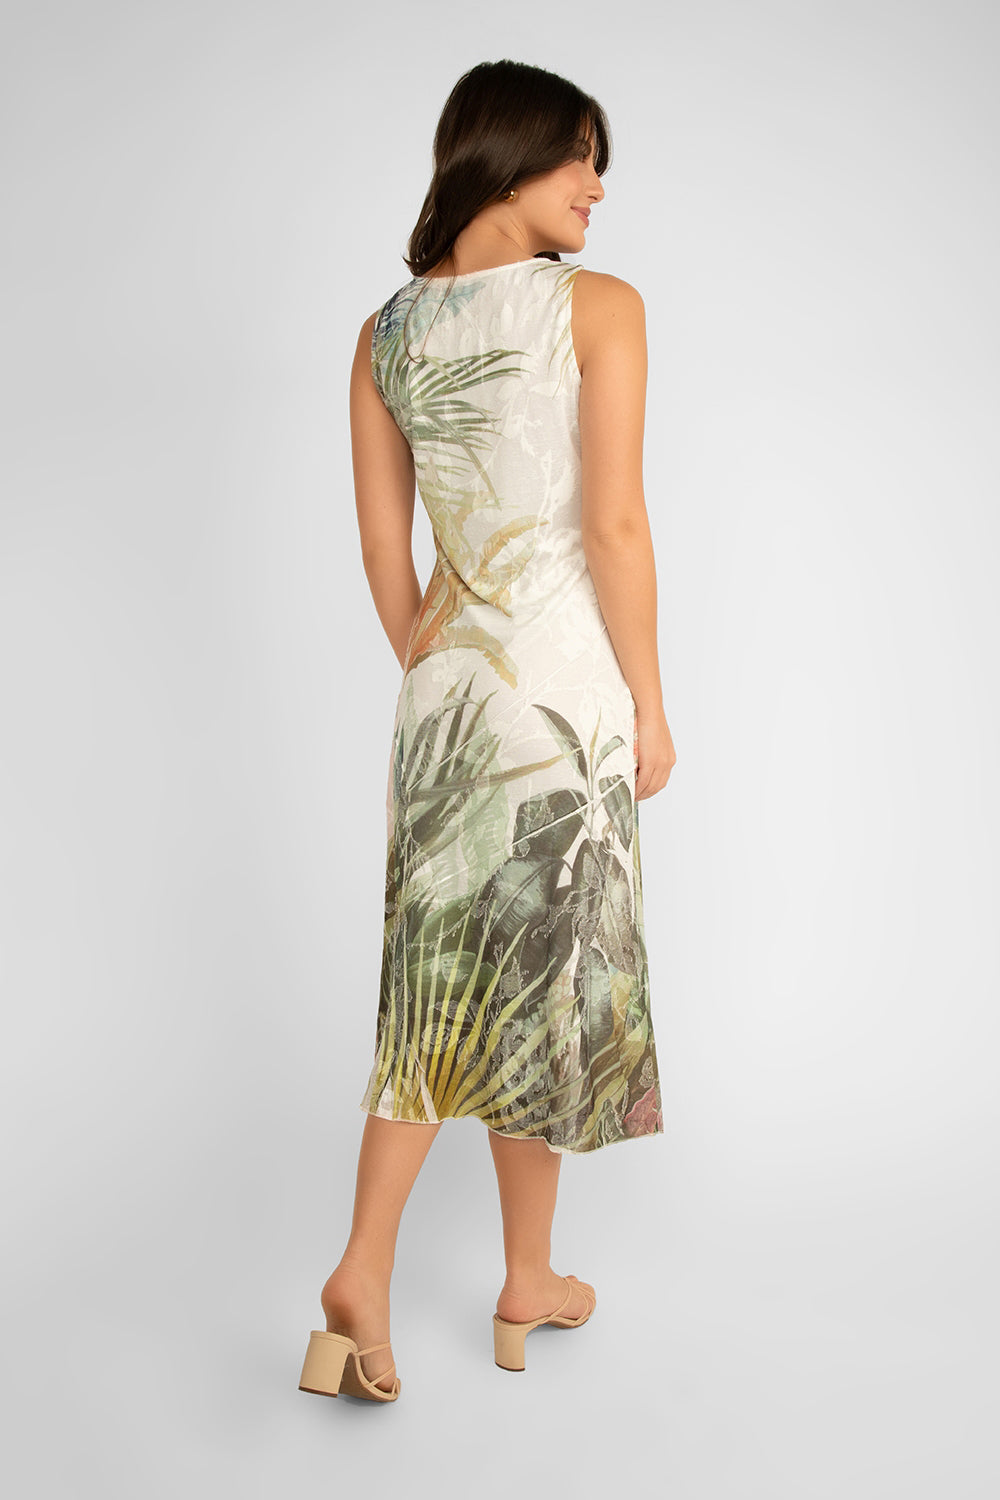 Back view of Picadilly (JC683SK) Women's Sleeveless Jacquard Printed Midi Dress in Artichoke Green Floral Print